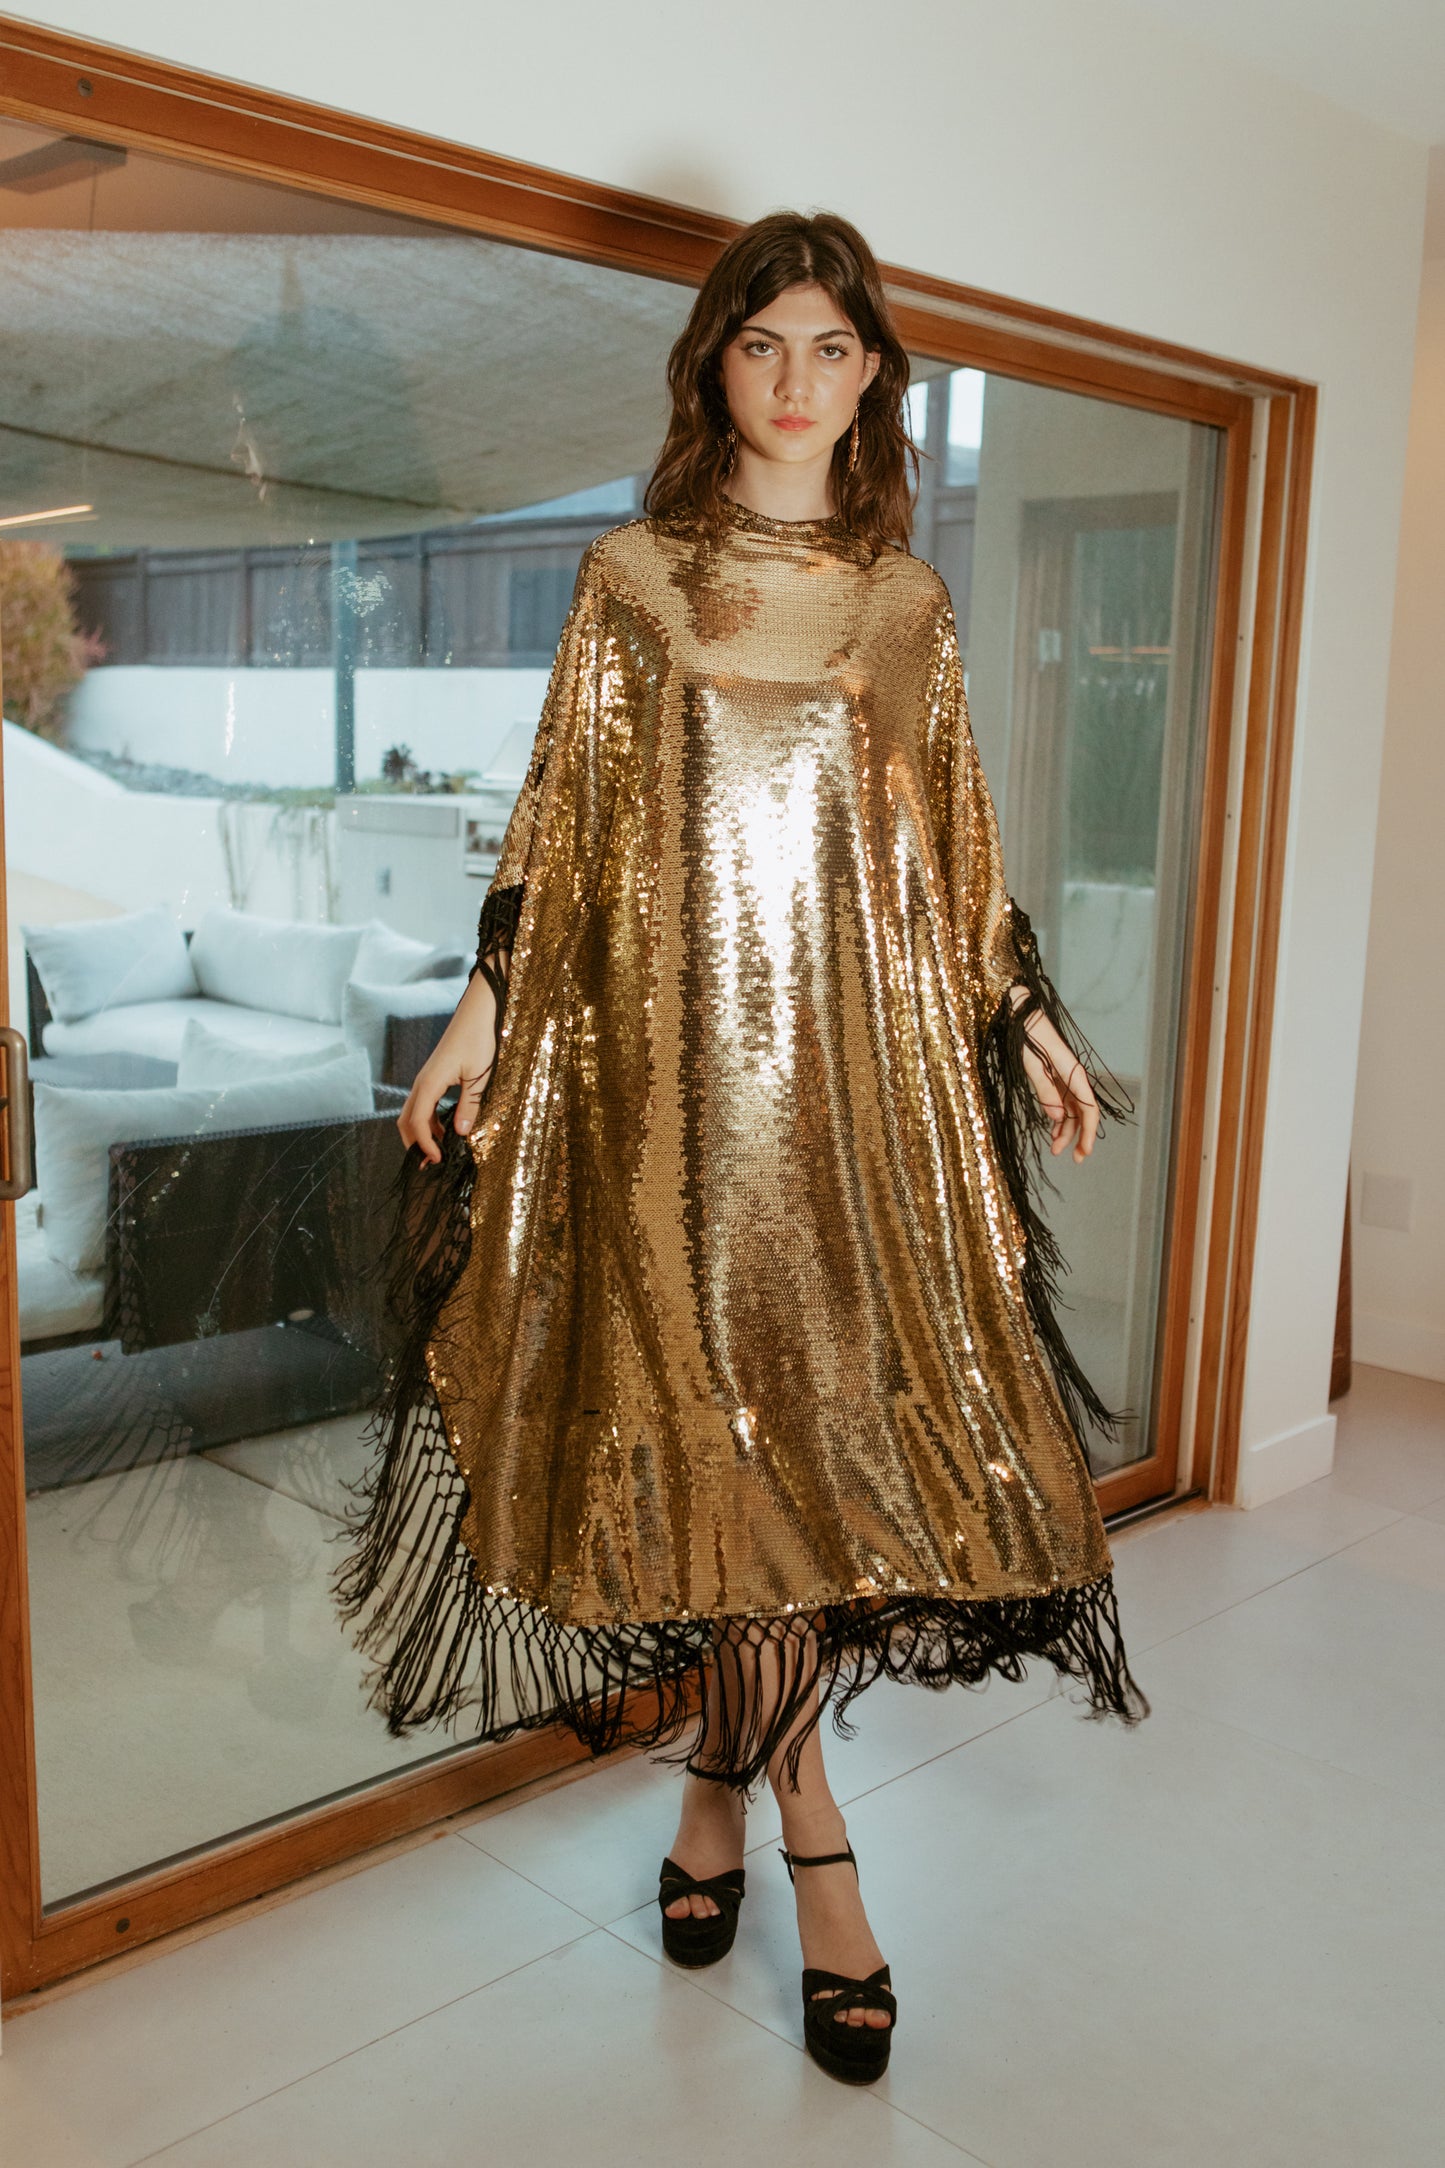 This caftan is a dazzling, full-length garment featuring a shimmering gold sequin overlay on a mesh fabric. The sequins catch the light, creating a sparkling effect throughout. It has a mock neck collar with a straight, loose fit that drapes elegantly over the body. The edges of the caftan, including the hem and the sides, are embellished with long, silk black fringe that add movement and a playful flair to the garment.